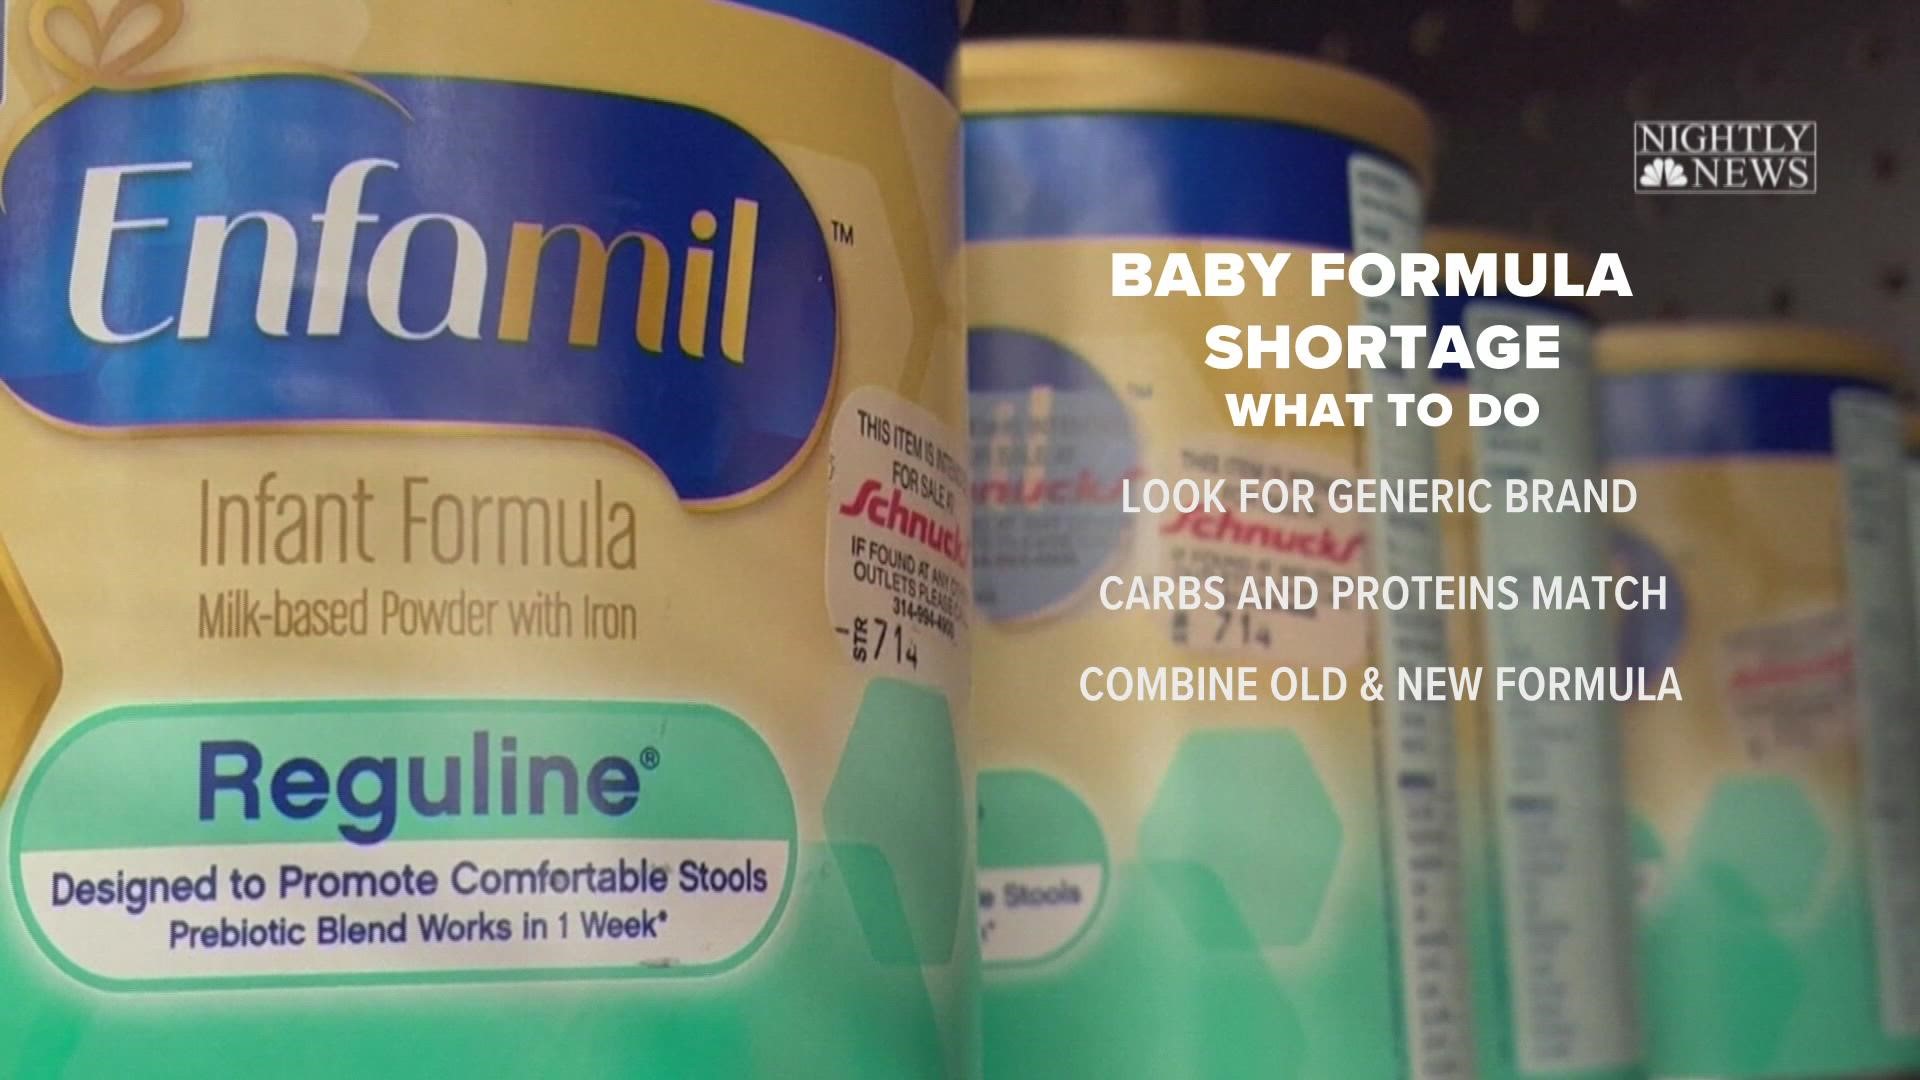 Data company Datasembly says 40 percent of America's baby formula supplies are out of stock. 9-news reporter Jaleesa Irizarry spoke with a nurse to find out.